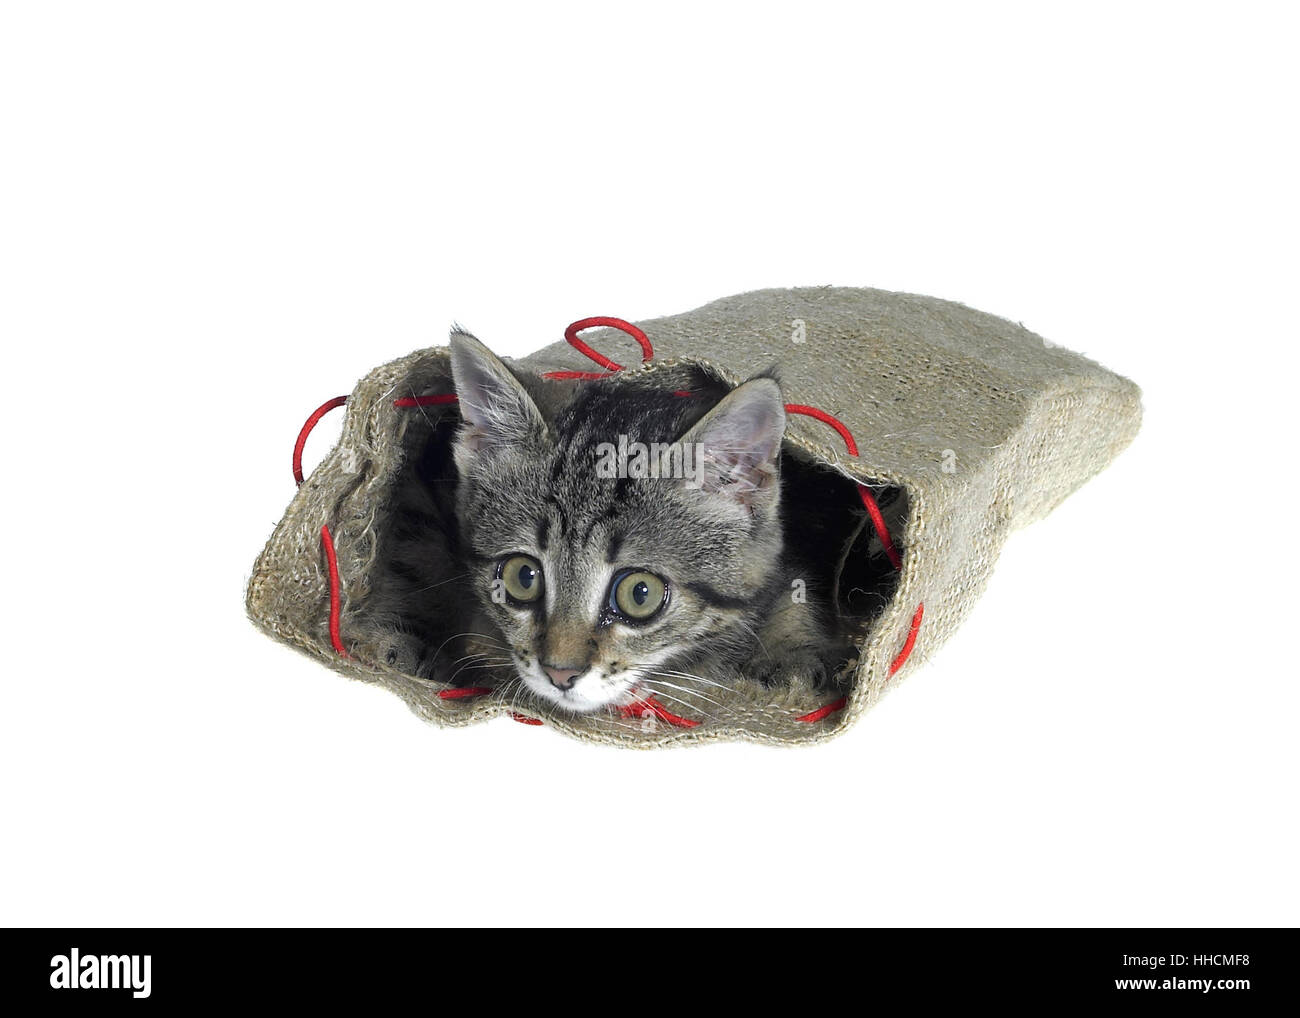 kitten in a small jute sack while looking out. Studio photography isolated on white Stock Photo